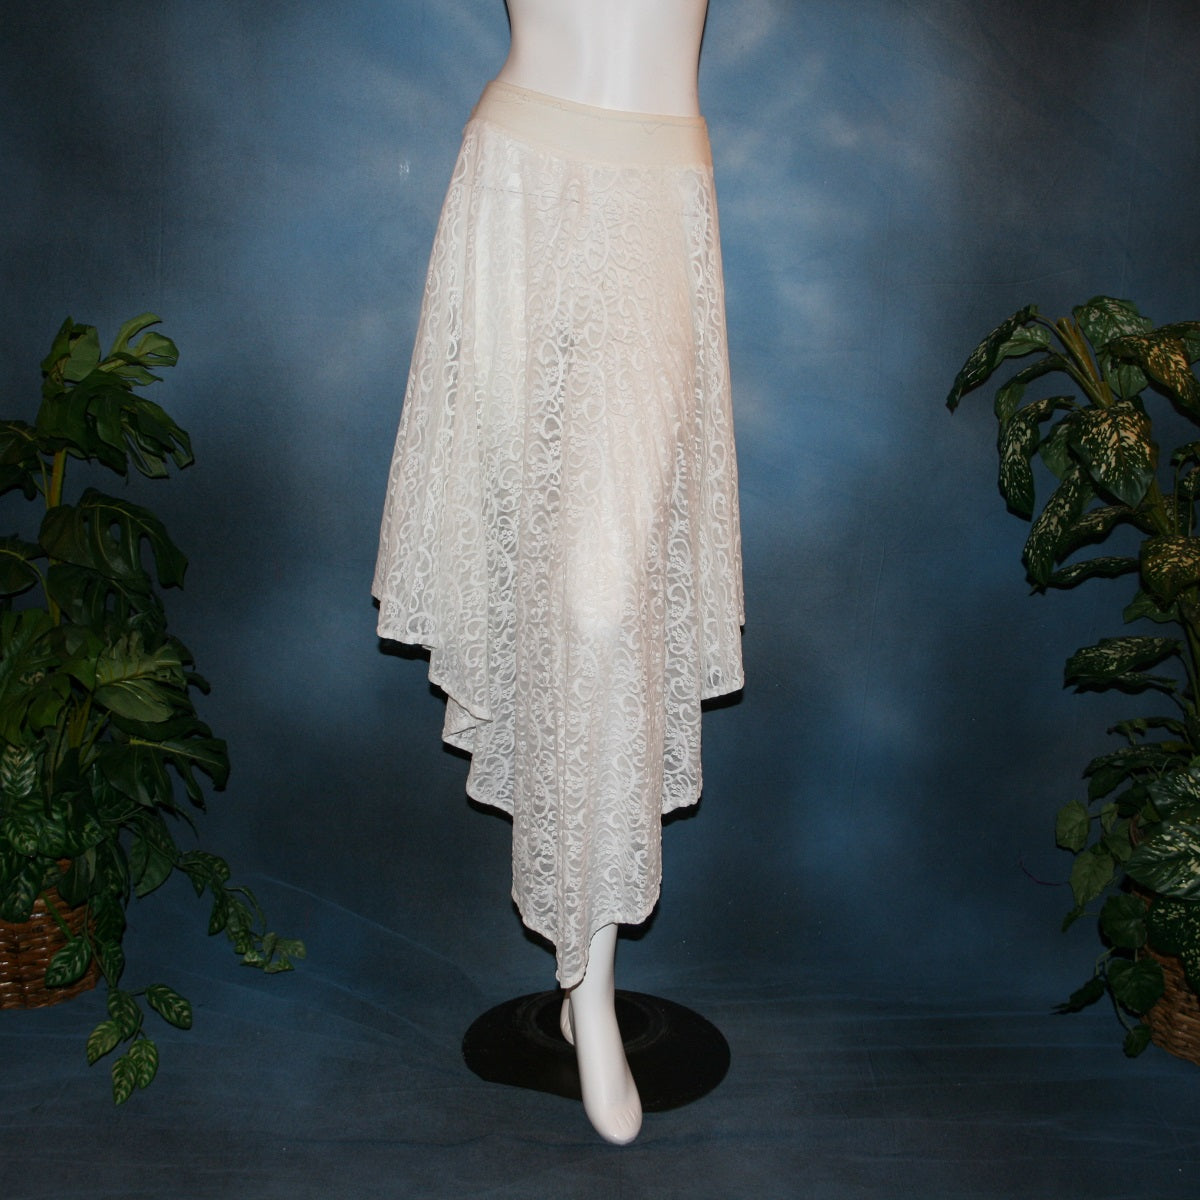 white ballroom skirt crafted from stunning stretch lace features an extra full, waltzing length design and is slightly shorter on the sides. 